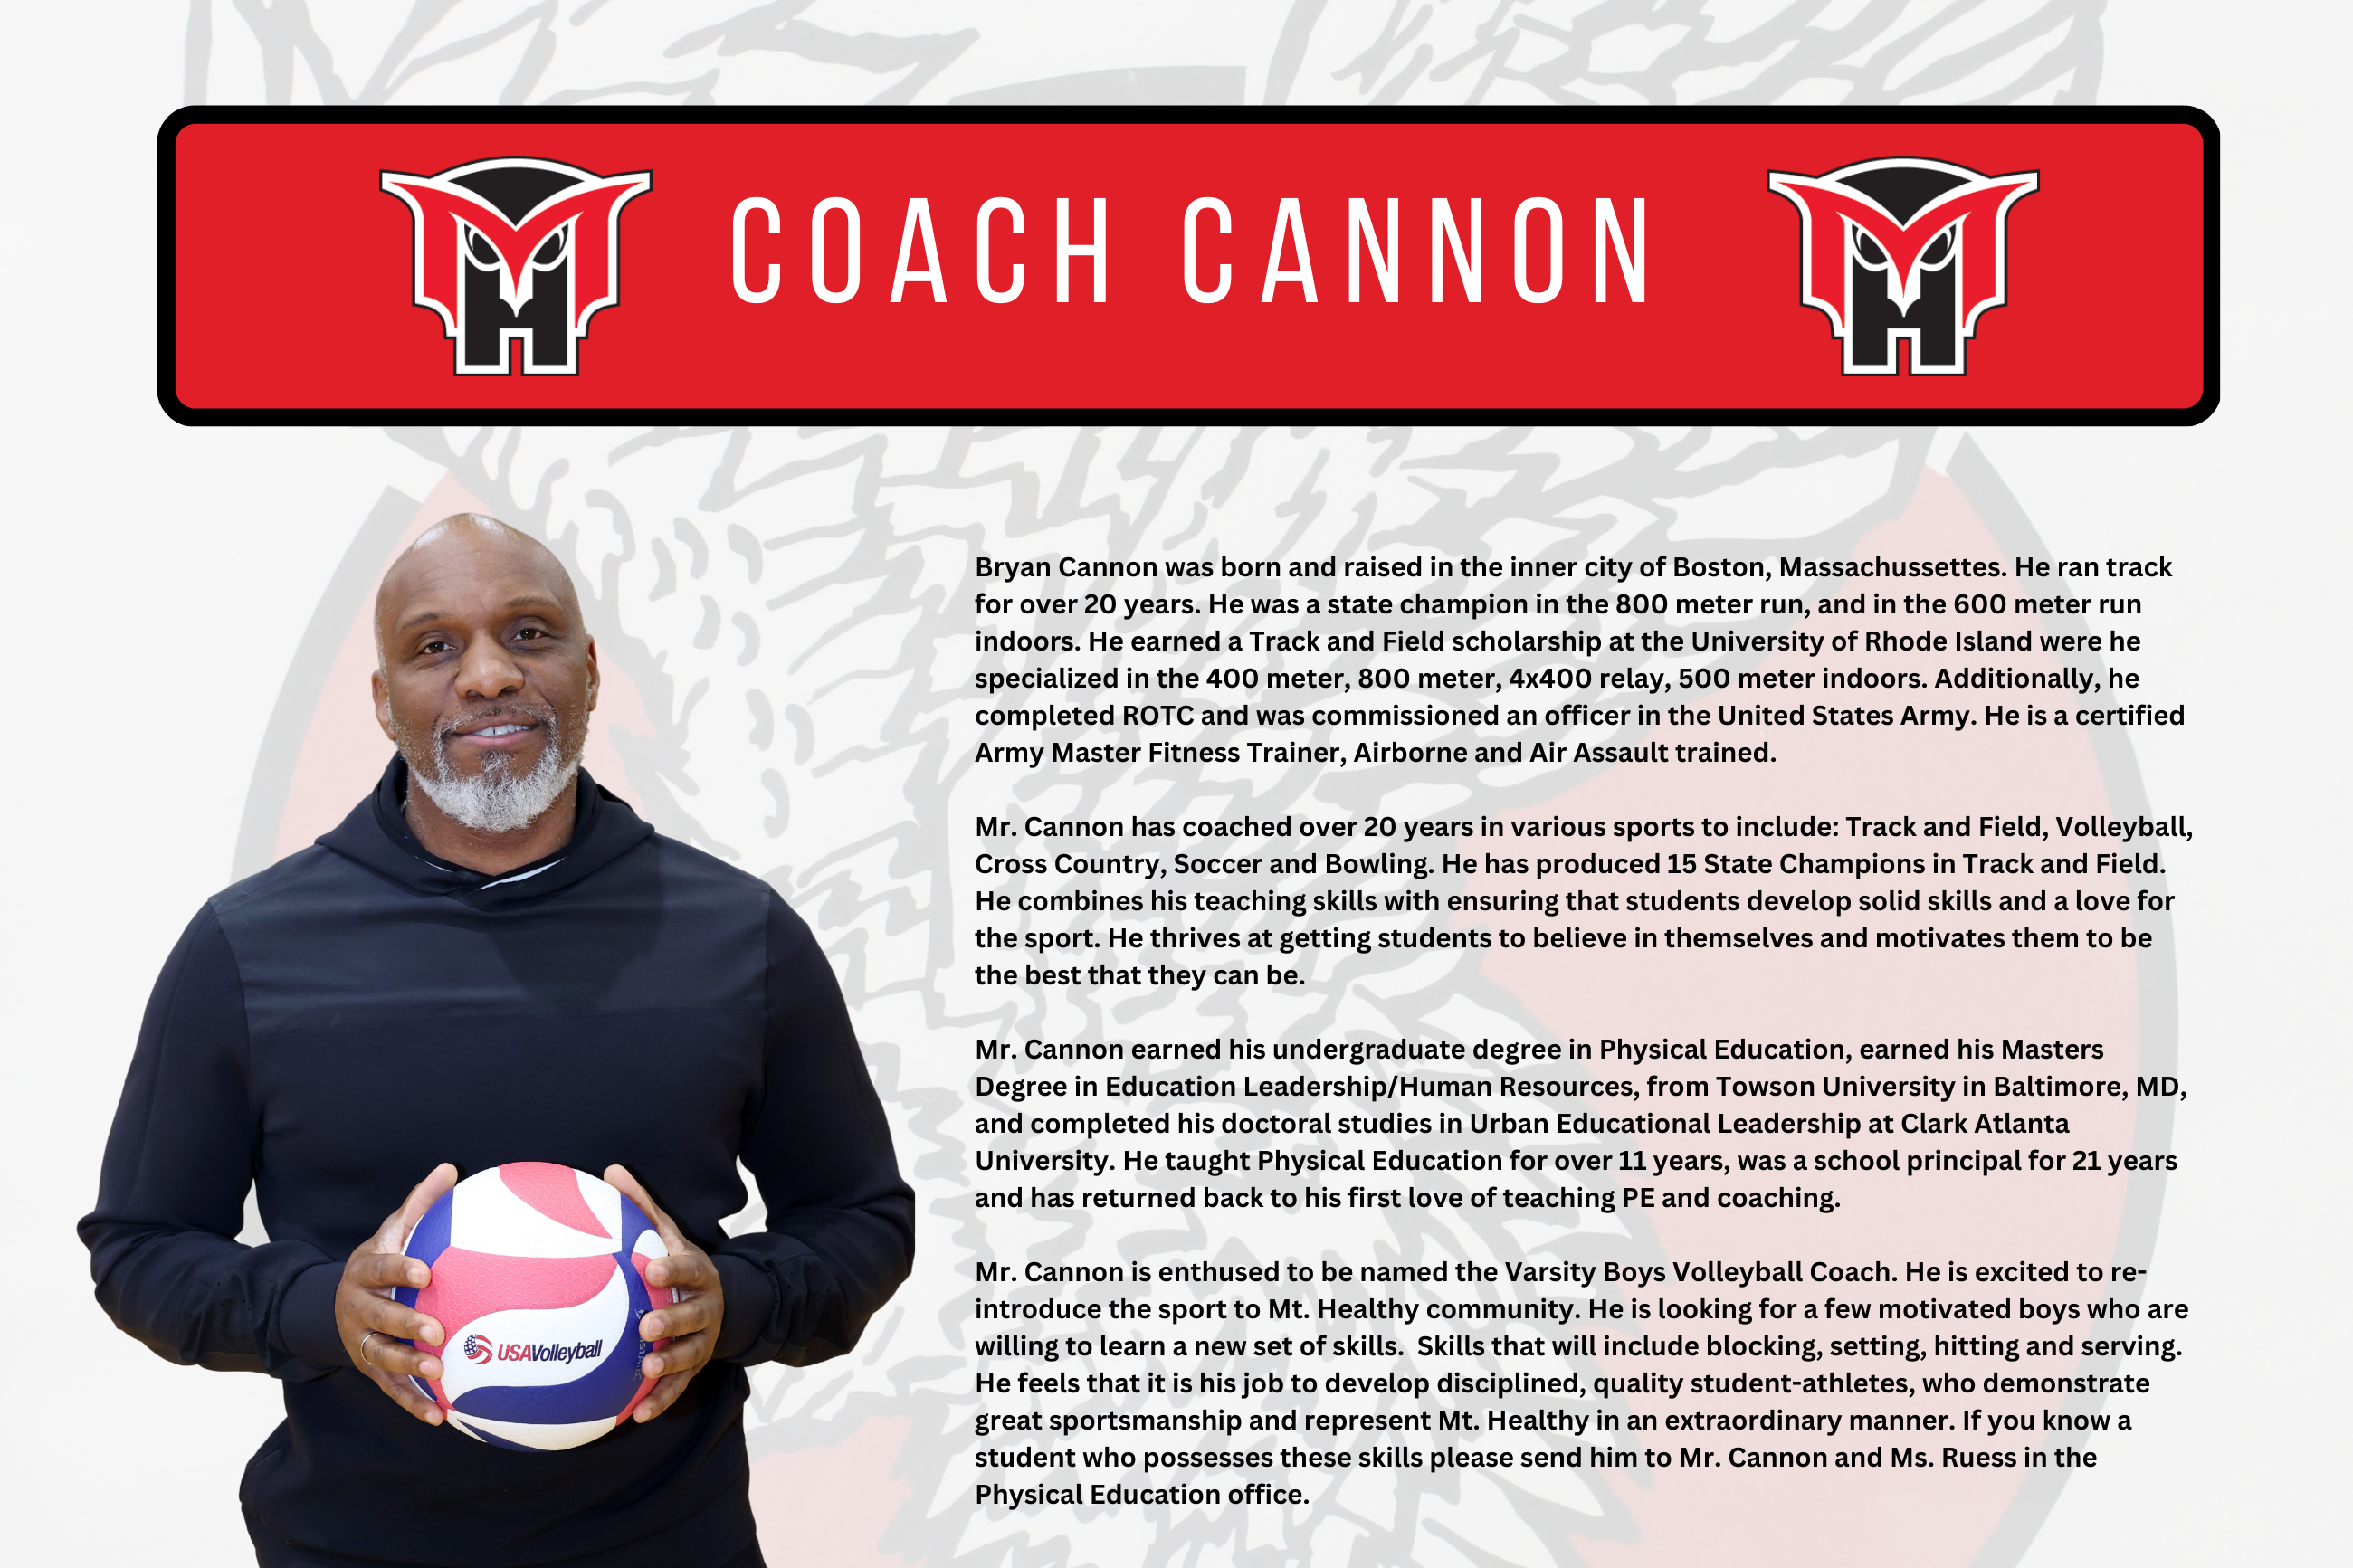 Coach Cannon Biography